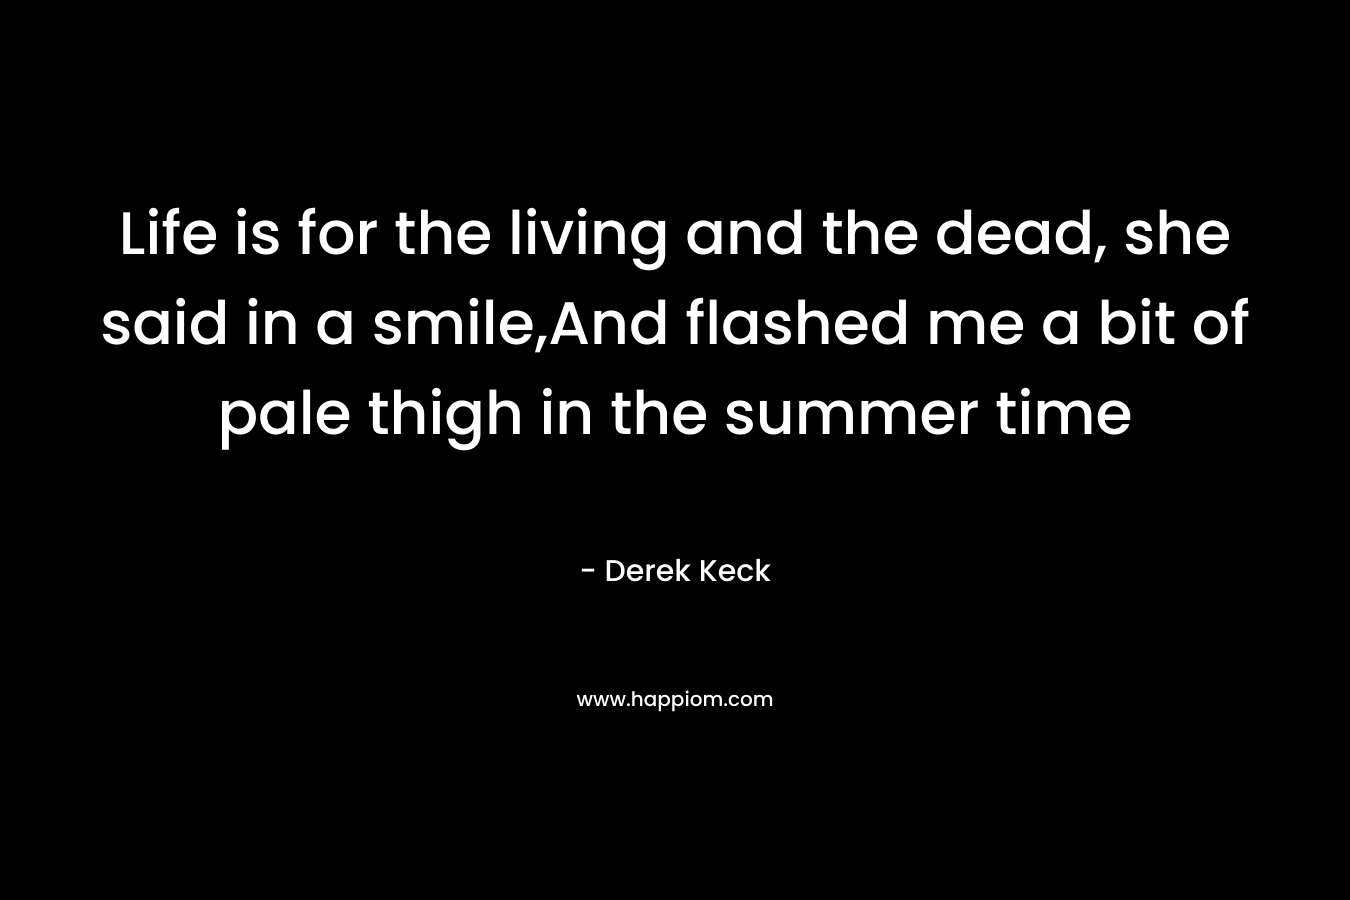 Life is for the living and the dead, she said in a smile,And flashed me a bit of pale thigh in the summer time – Derek Keck